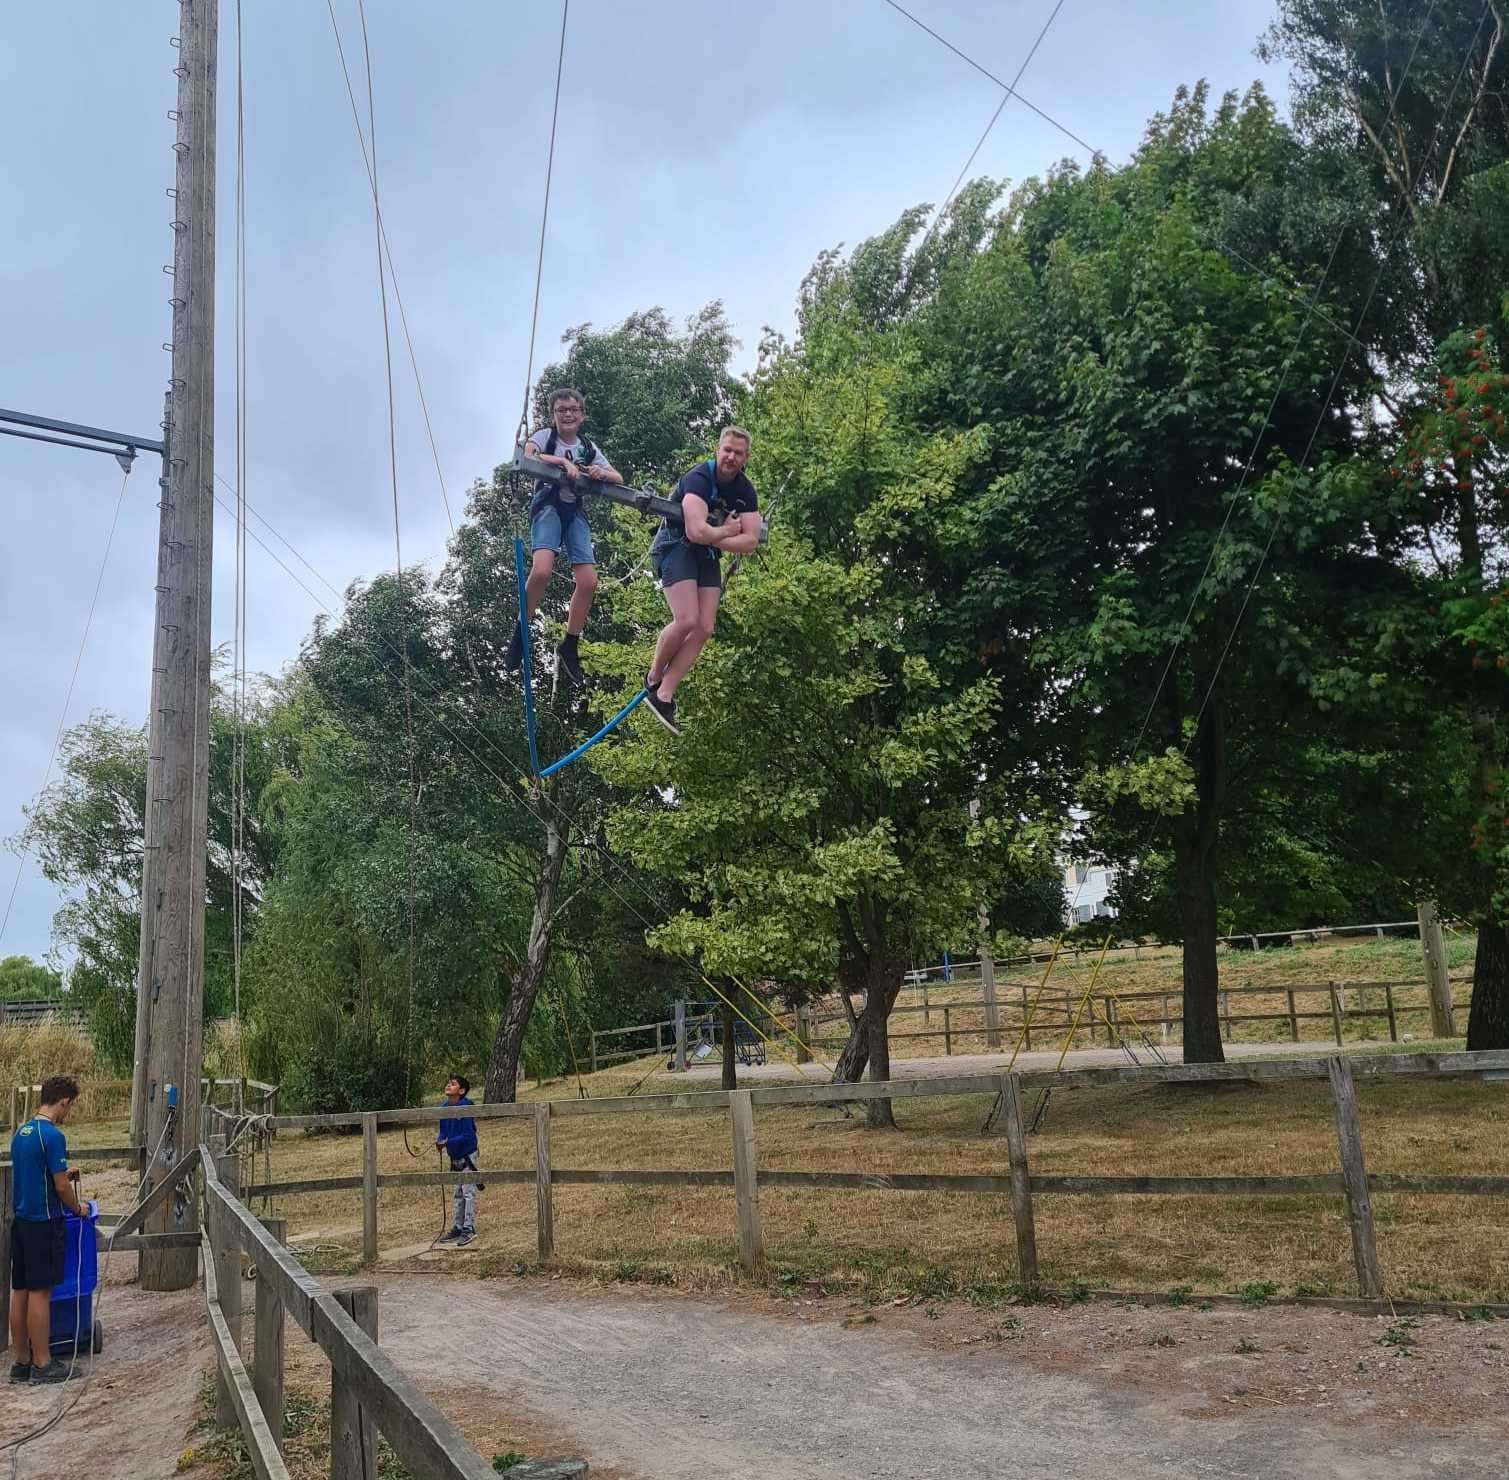 The giant swing will really make your stomach drop, so pray for a pre-lunchtime slot